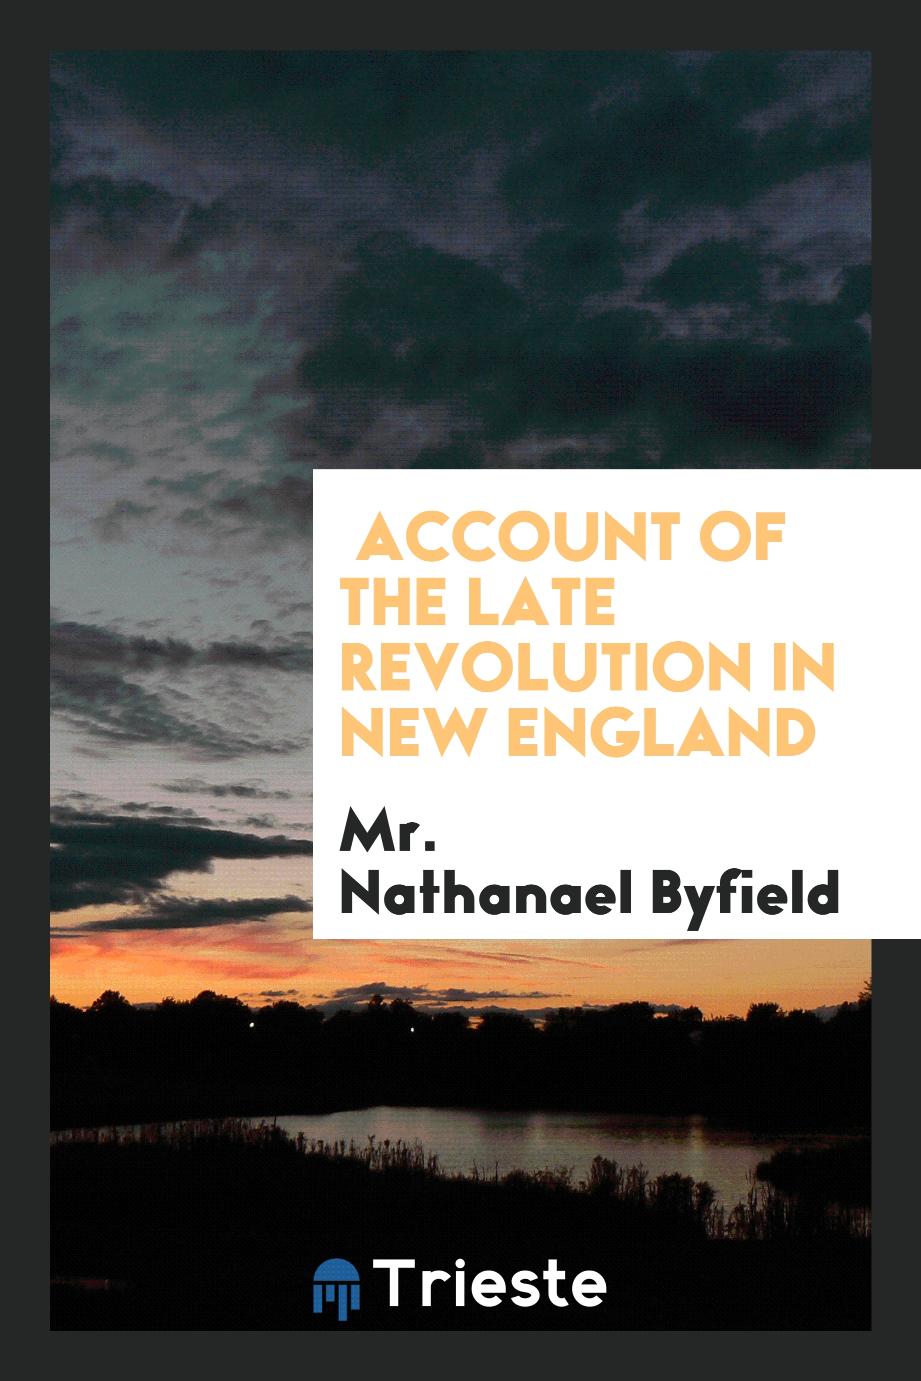 Account of the late revolution in New England